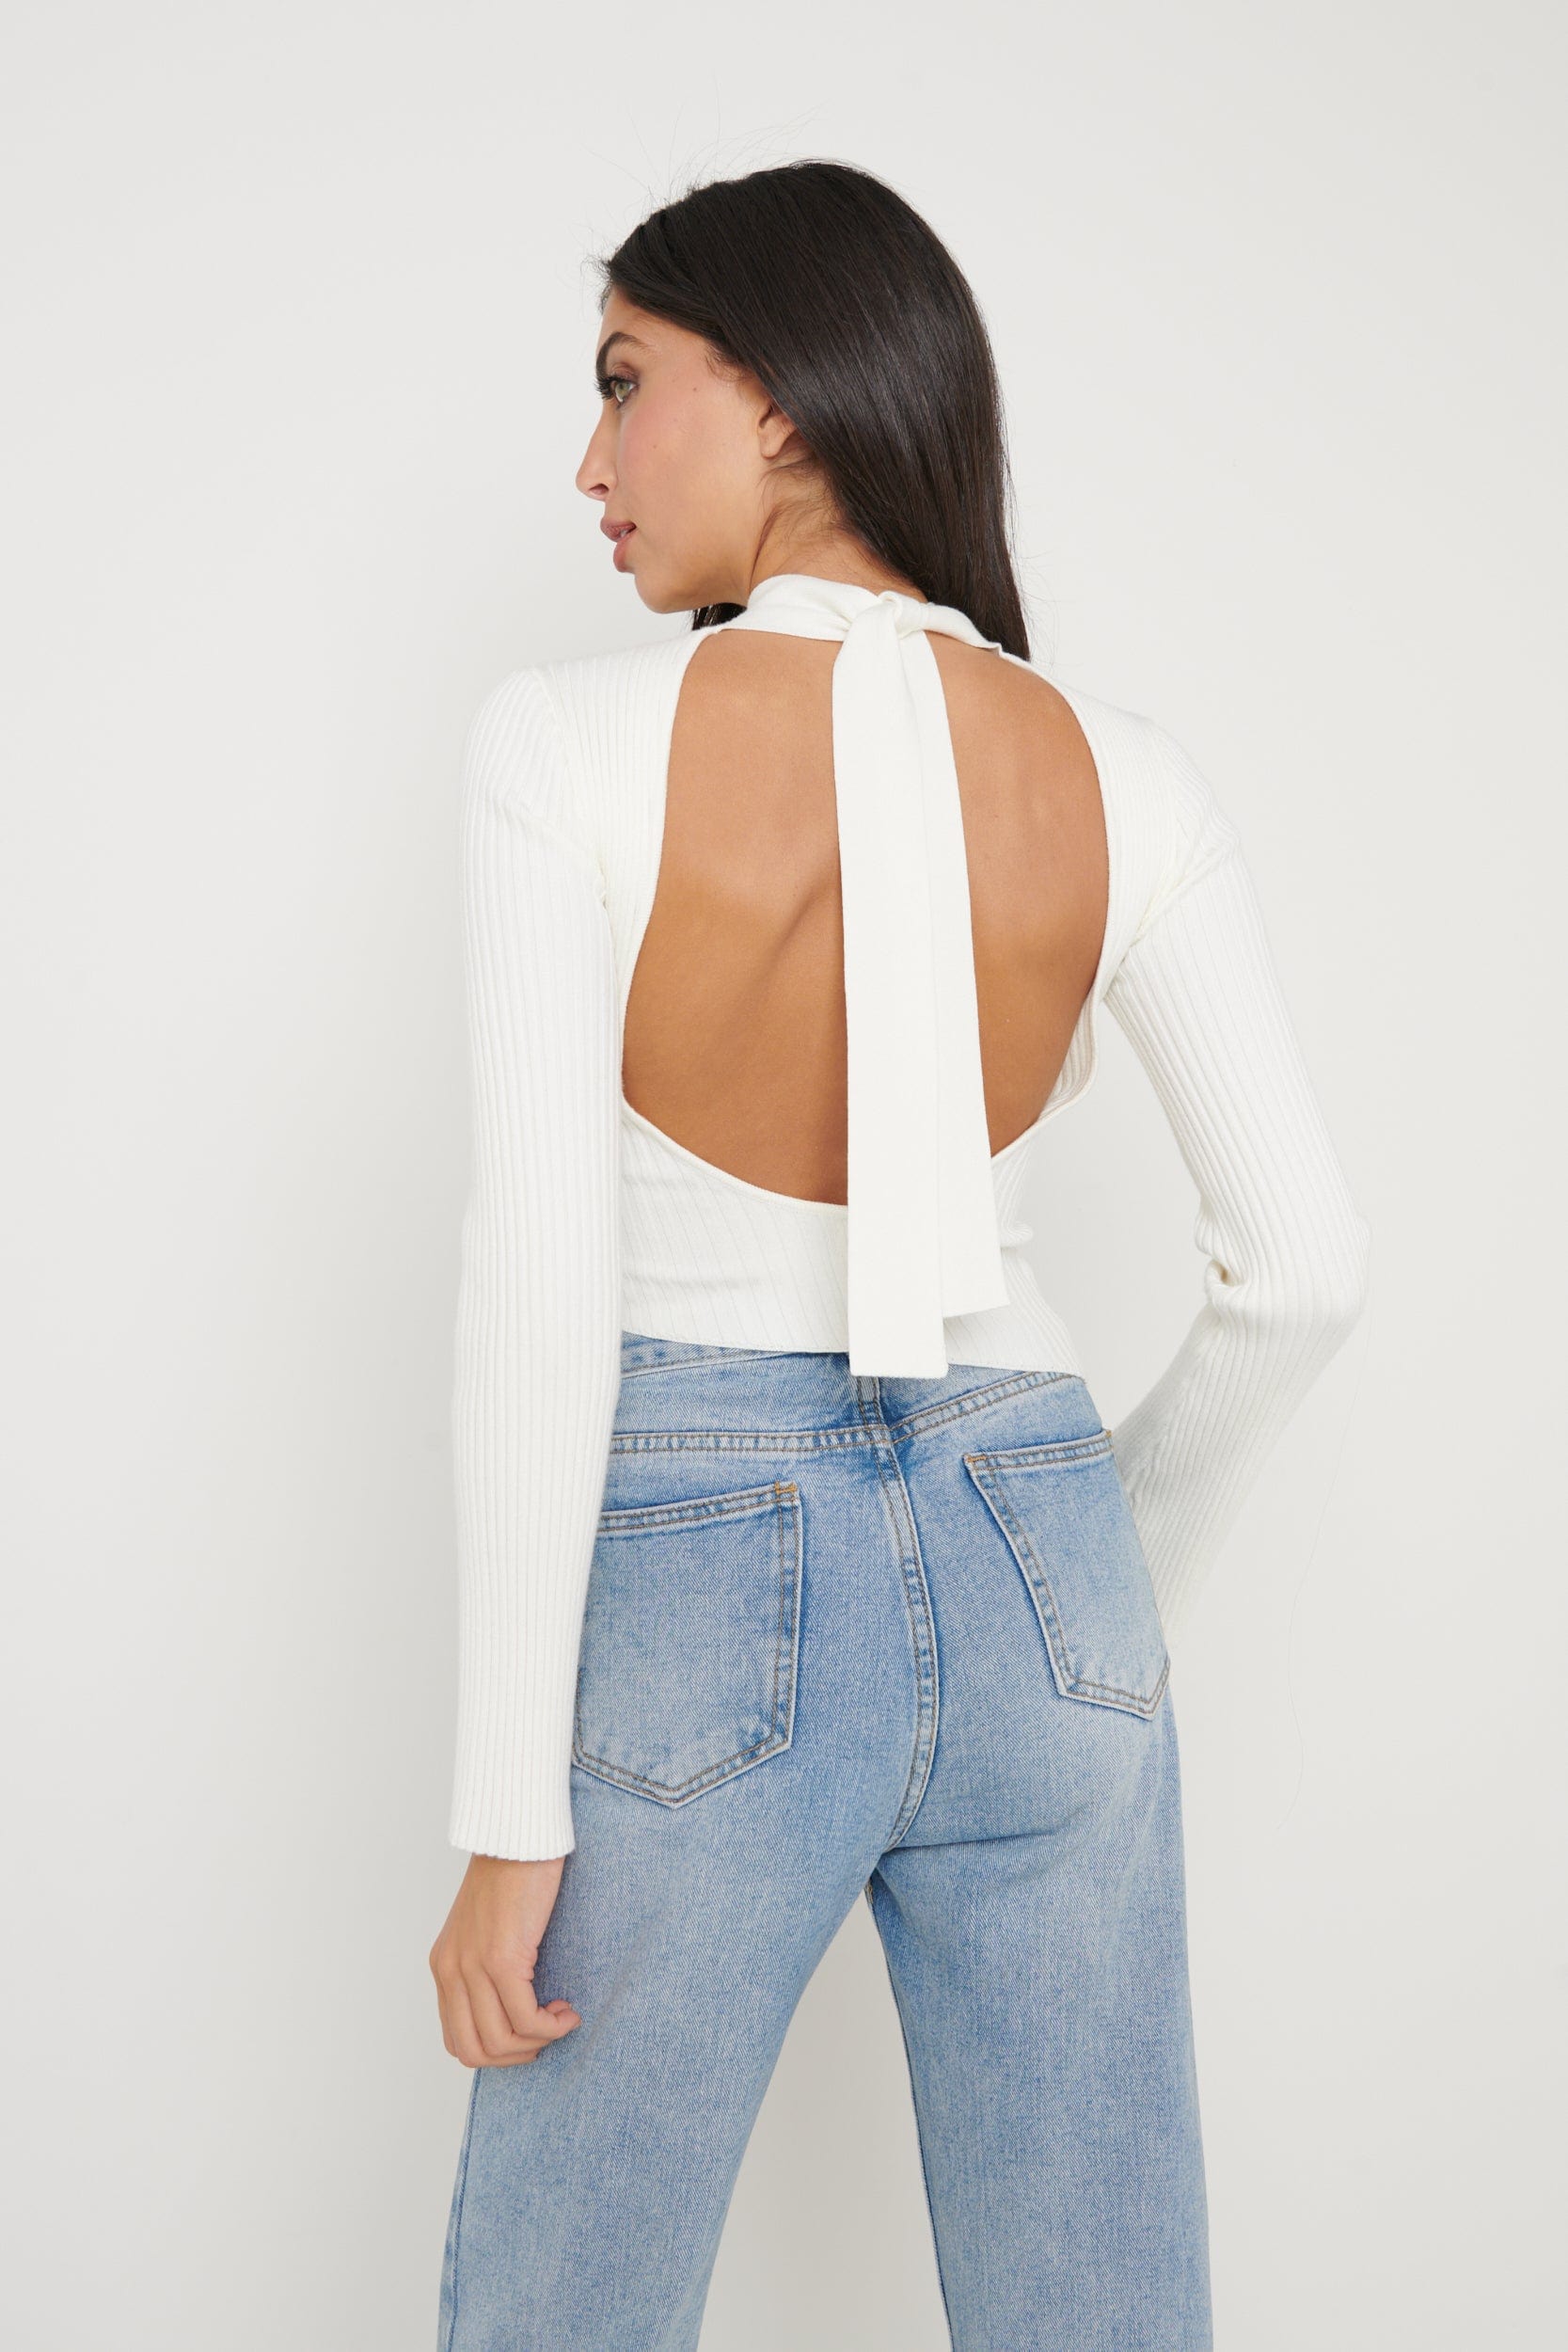 Lakelyn Backless High Neck Knit Top - Cream, L